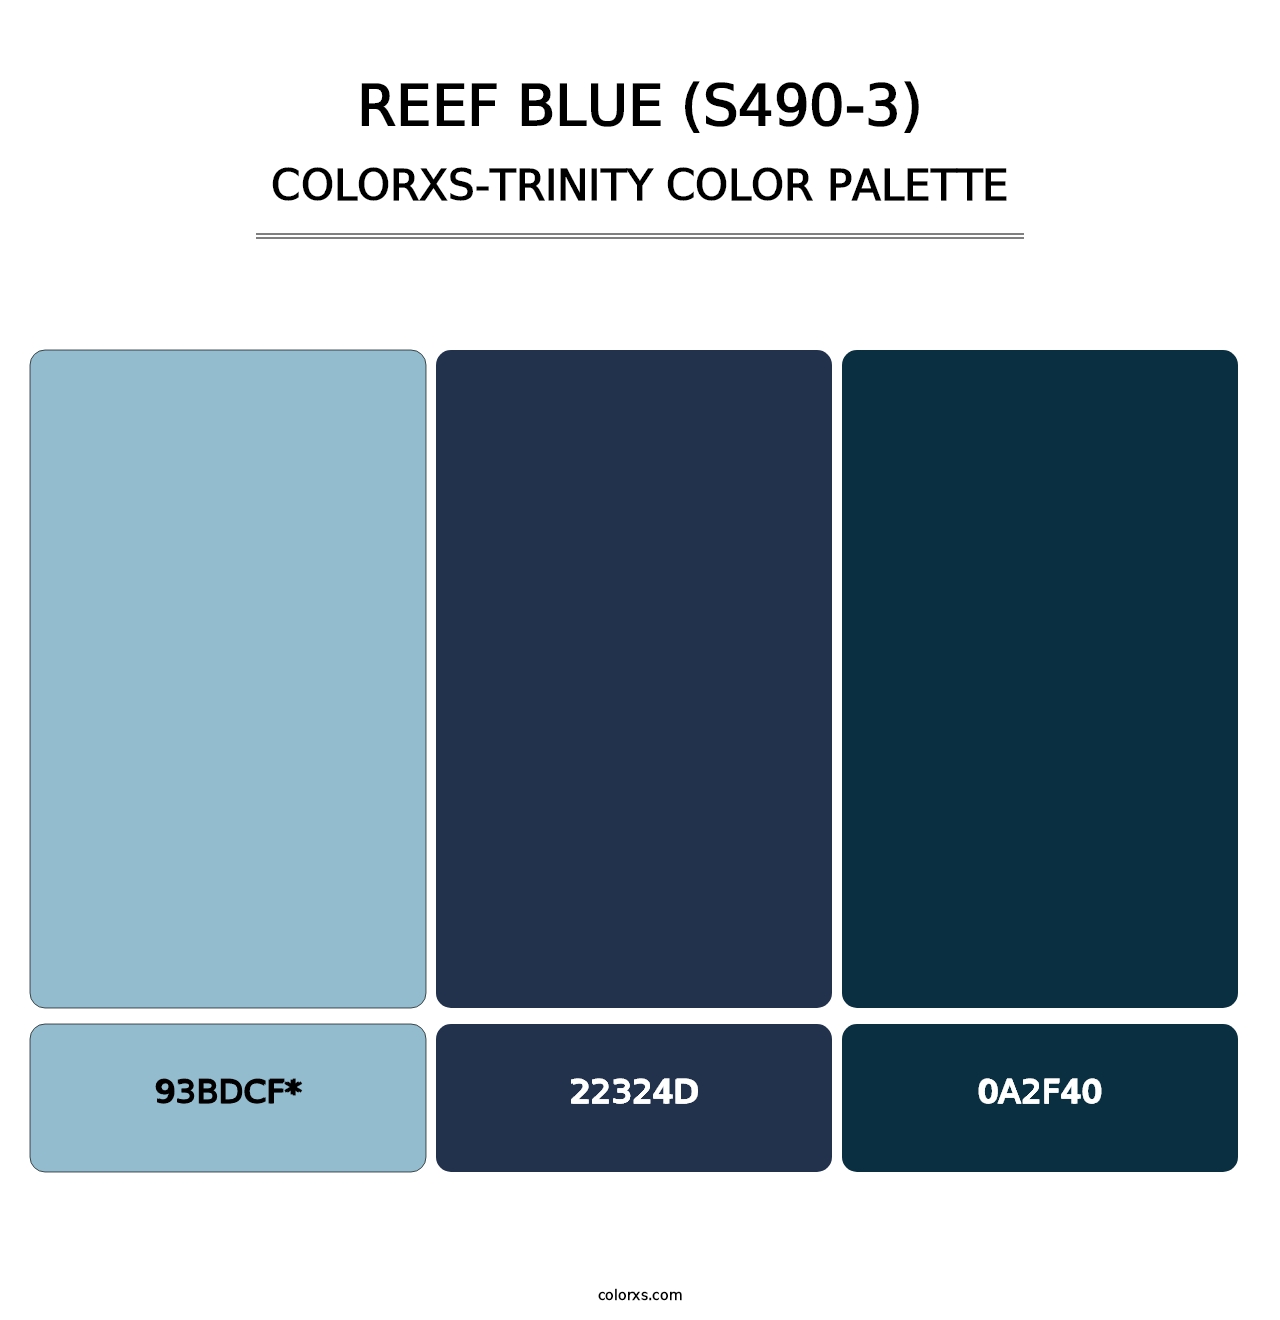 Reef Blue (S490-3) - Colorxs Trinity Palette